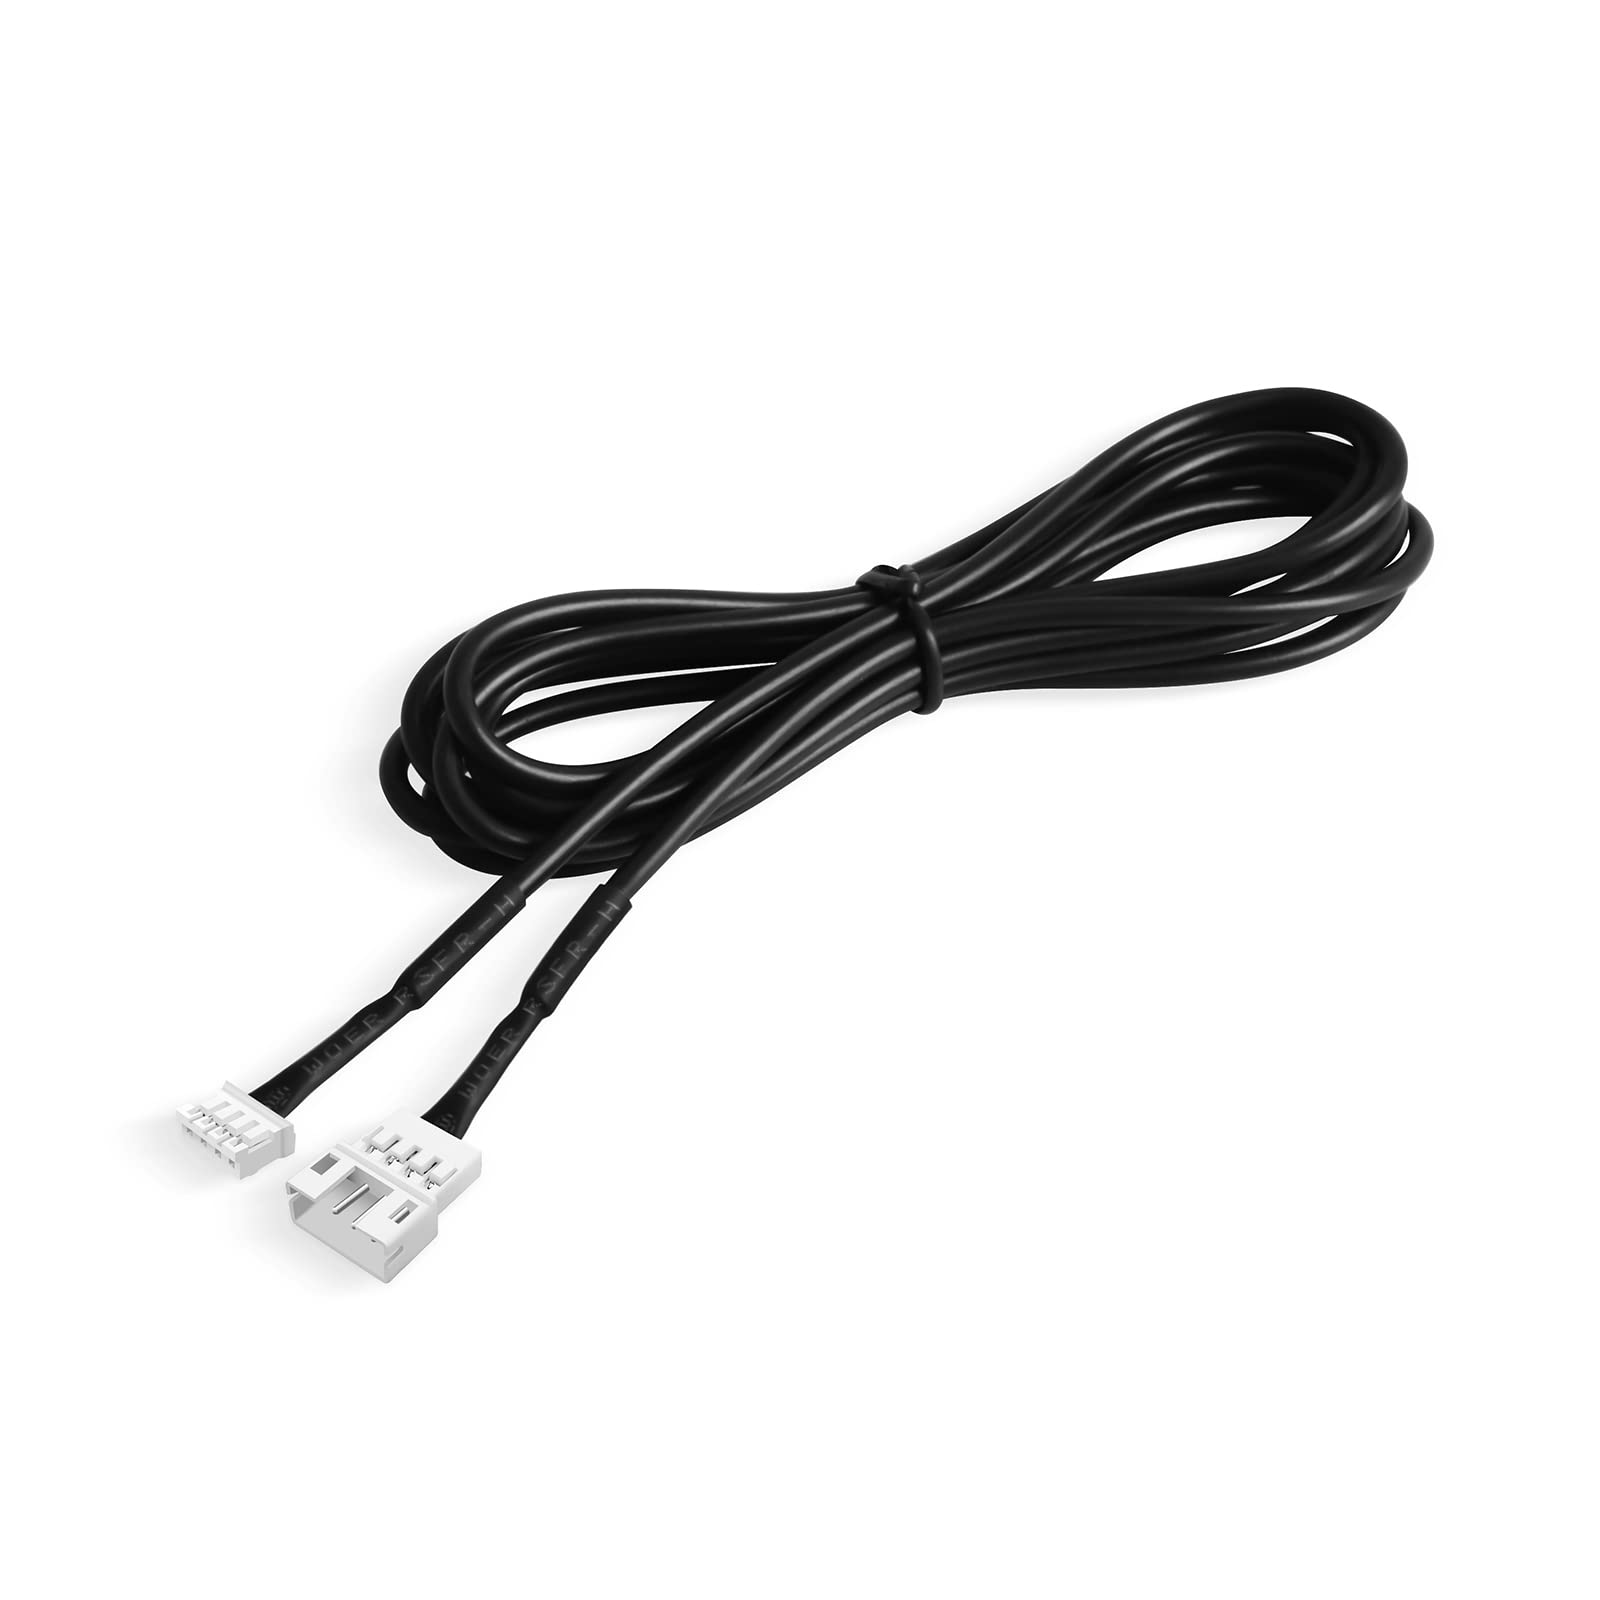 Acrylic Interior Car LED Strip Light Extension Wire 78.7inch, which fit for Dreamcolor&RGB Main Controller Connects and sub-Controller kit (not Including), Not fit dreamcolor 5 in 1(Single Controller) von TWETIZ